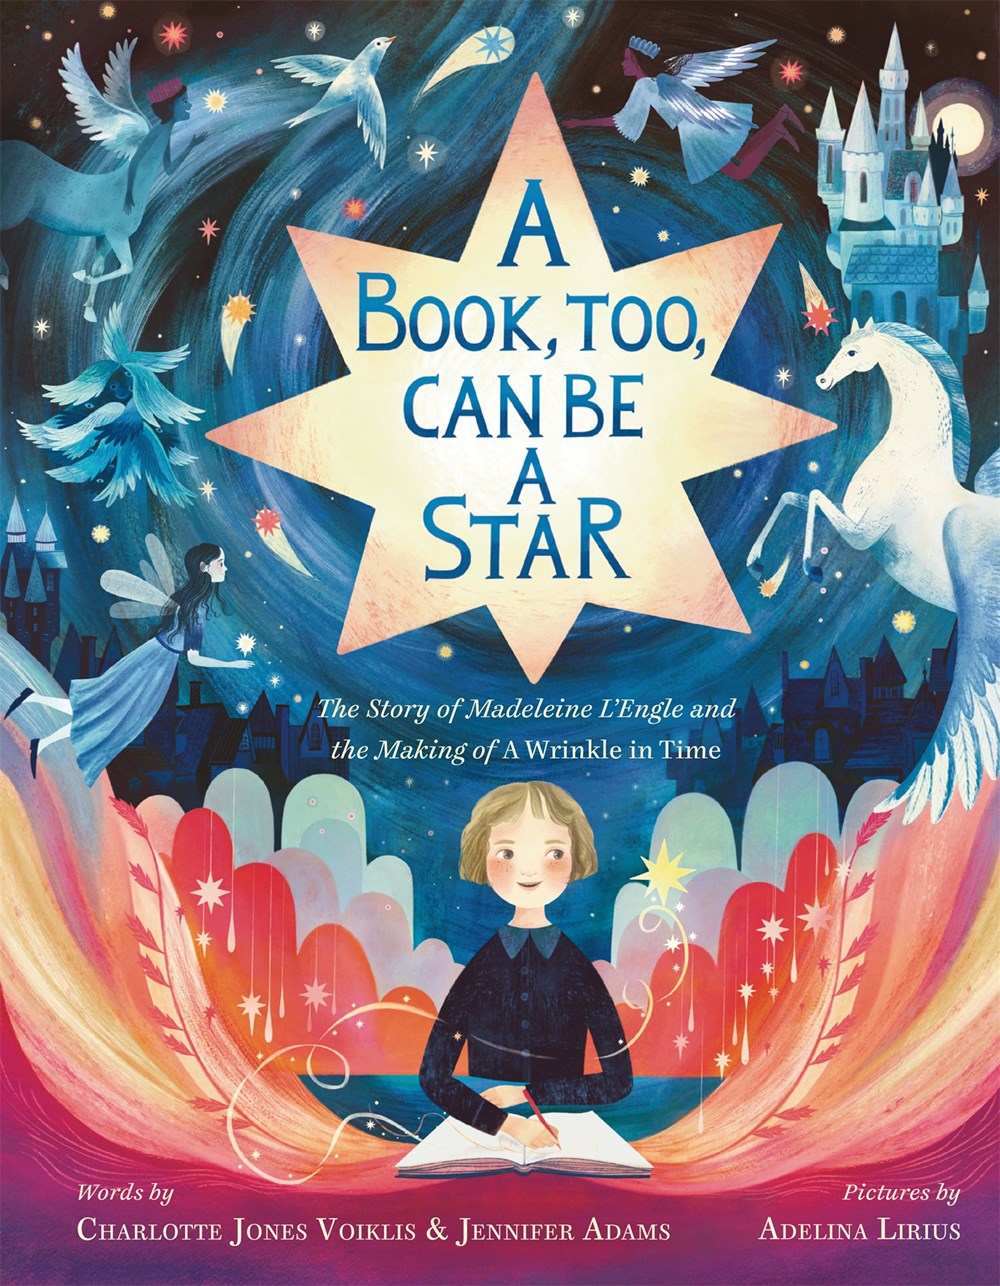 A Book, Too, Can Be a Star